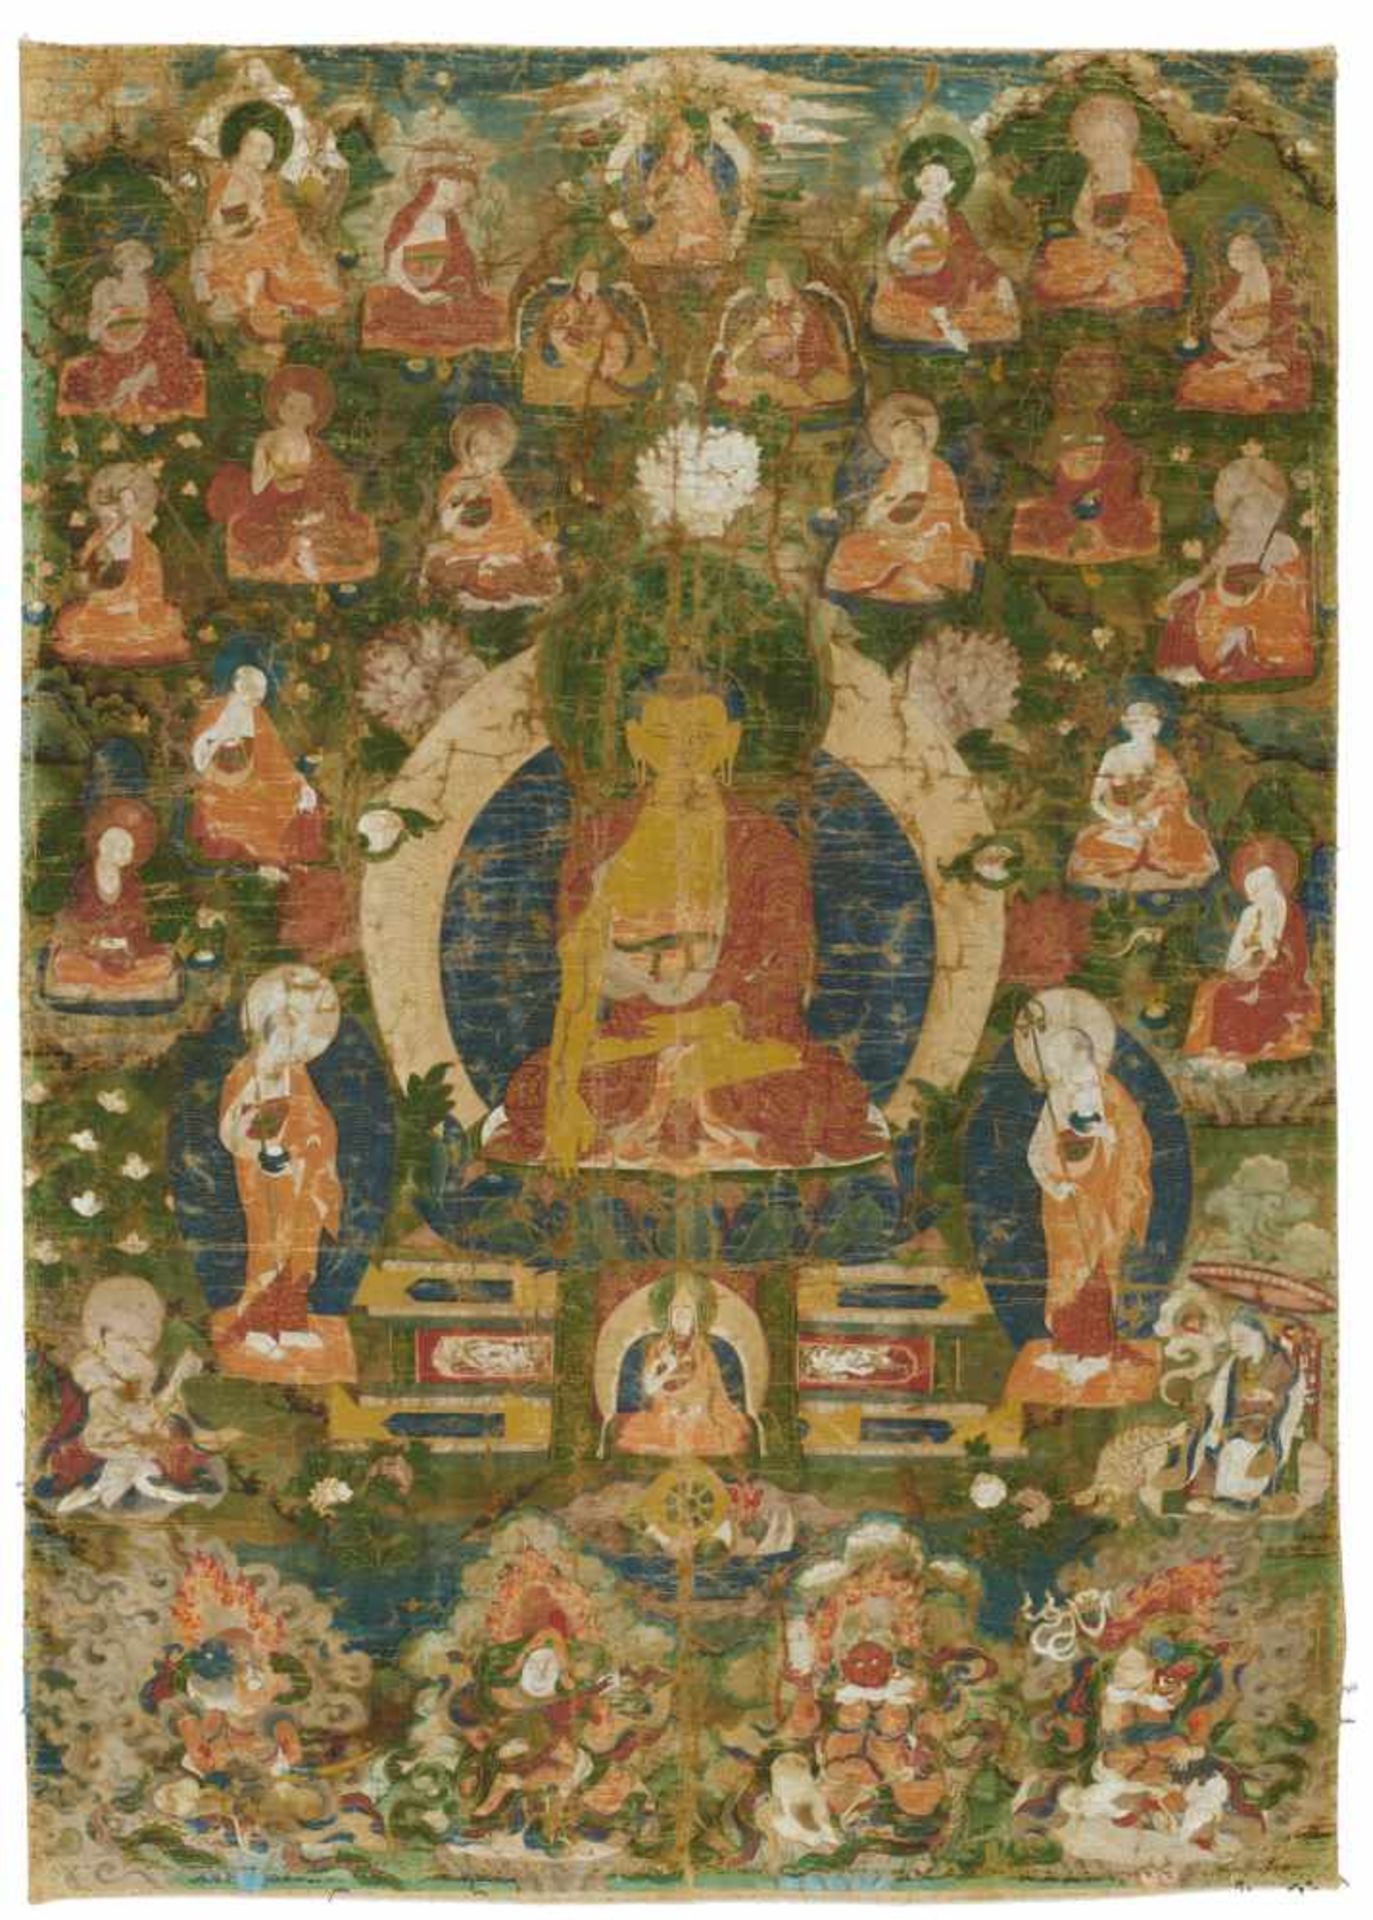 THANGKA OF BUDDHA SHAKYAMUNI WITH THE 16 ARHAT. Tibet. 19th c. Pigments and gold on fabric. Fine